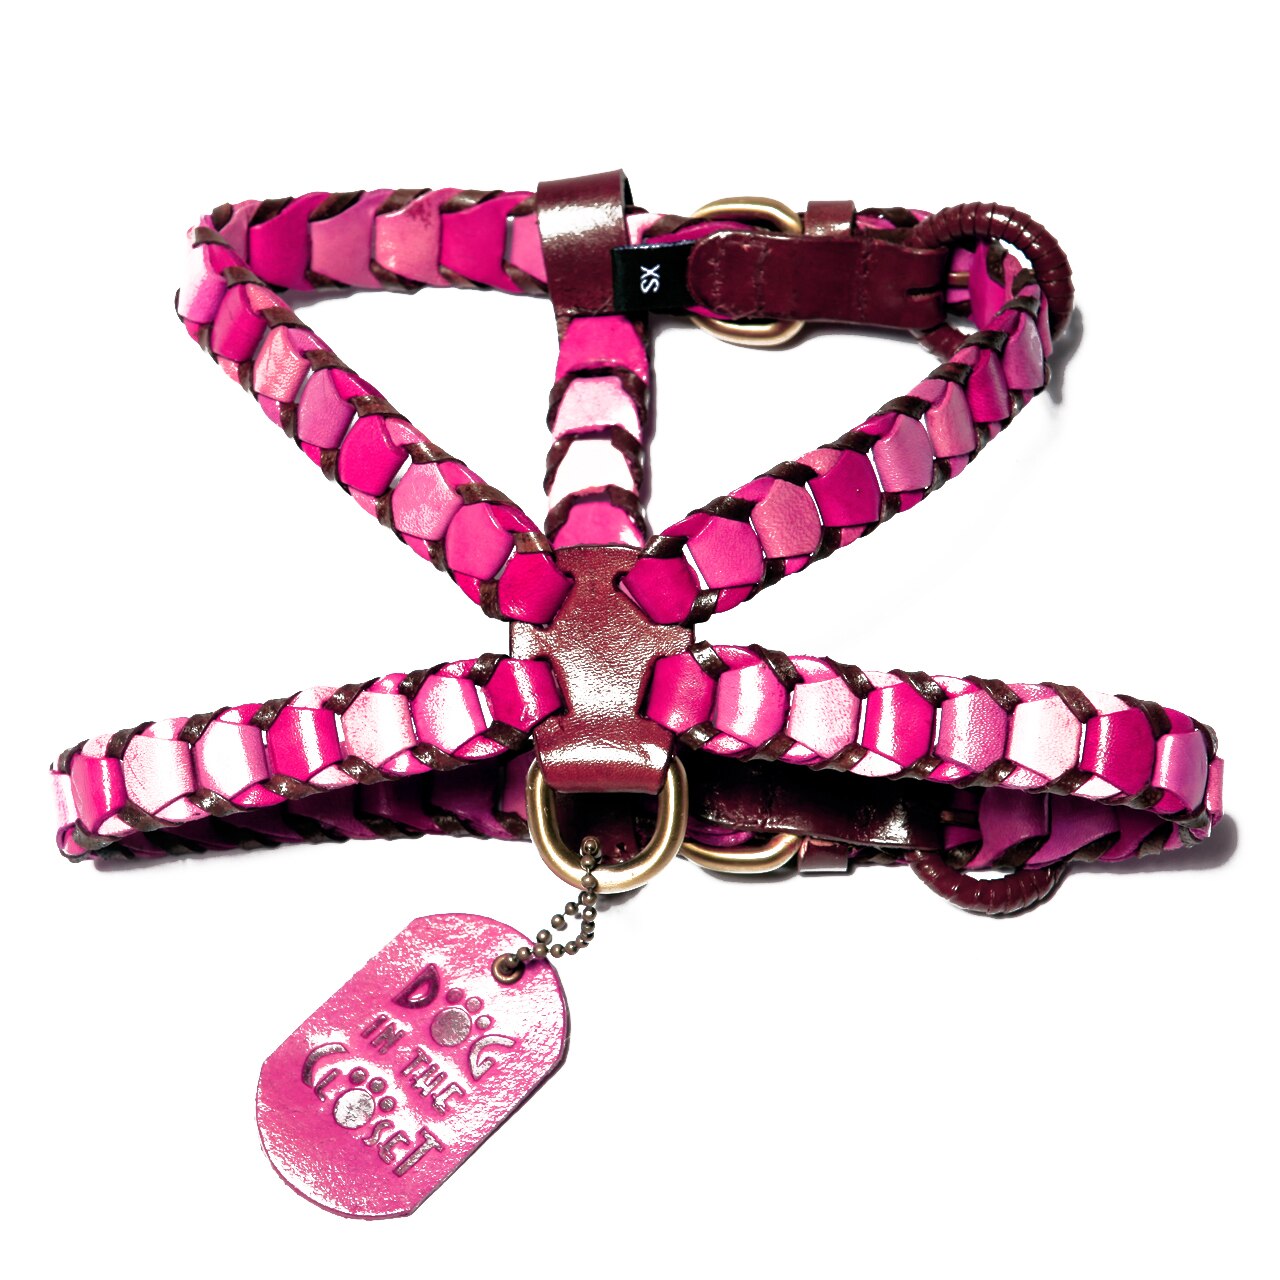 Shades of Pink Leather Dog Harness